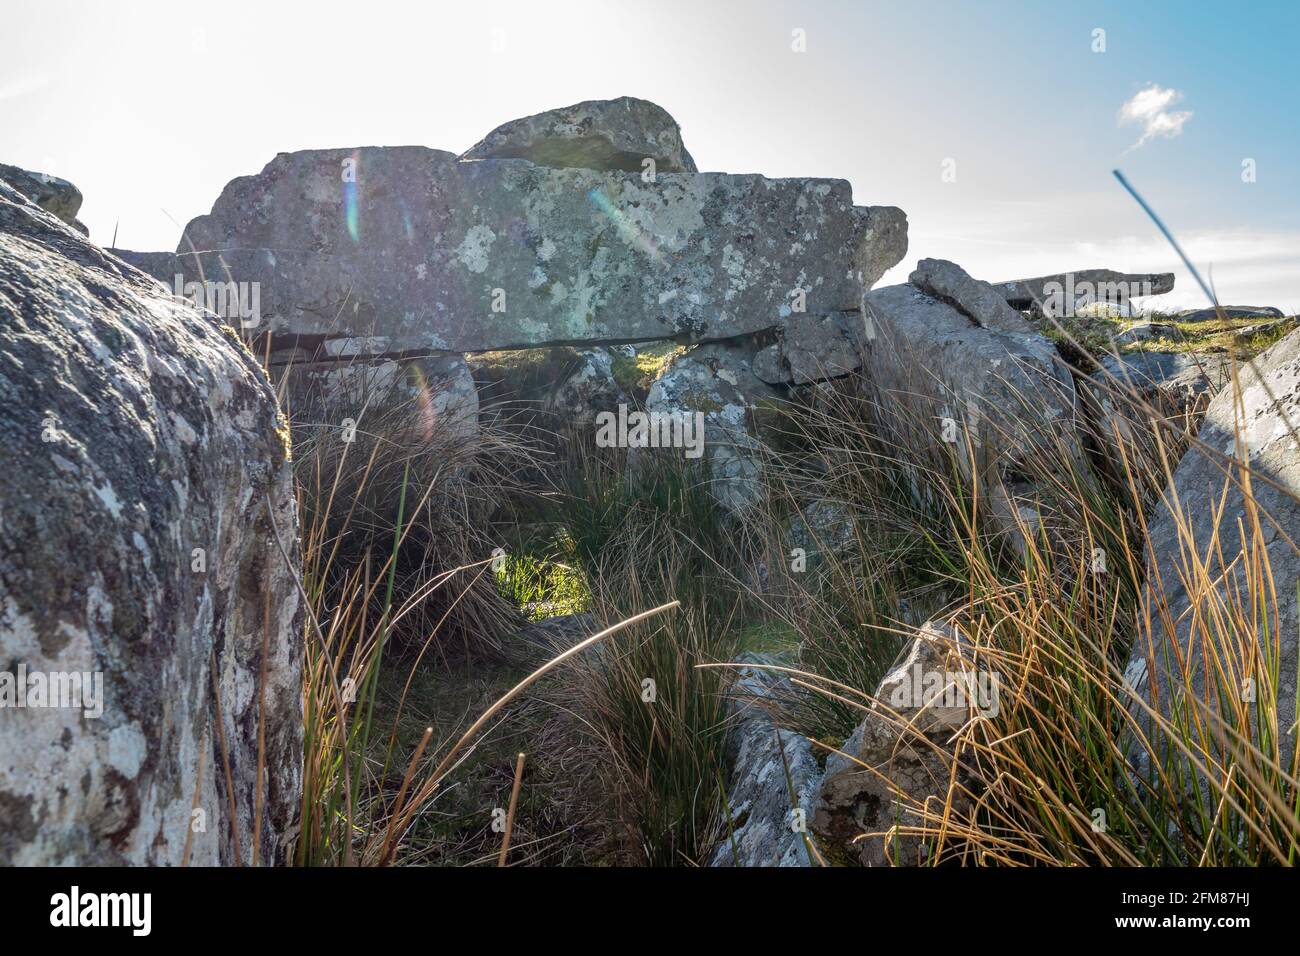 The Malinmore Memorial Tomb by Gelcolumbkille in Donegal, Ireland. Stock Photo